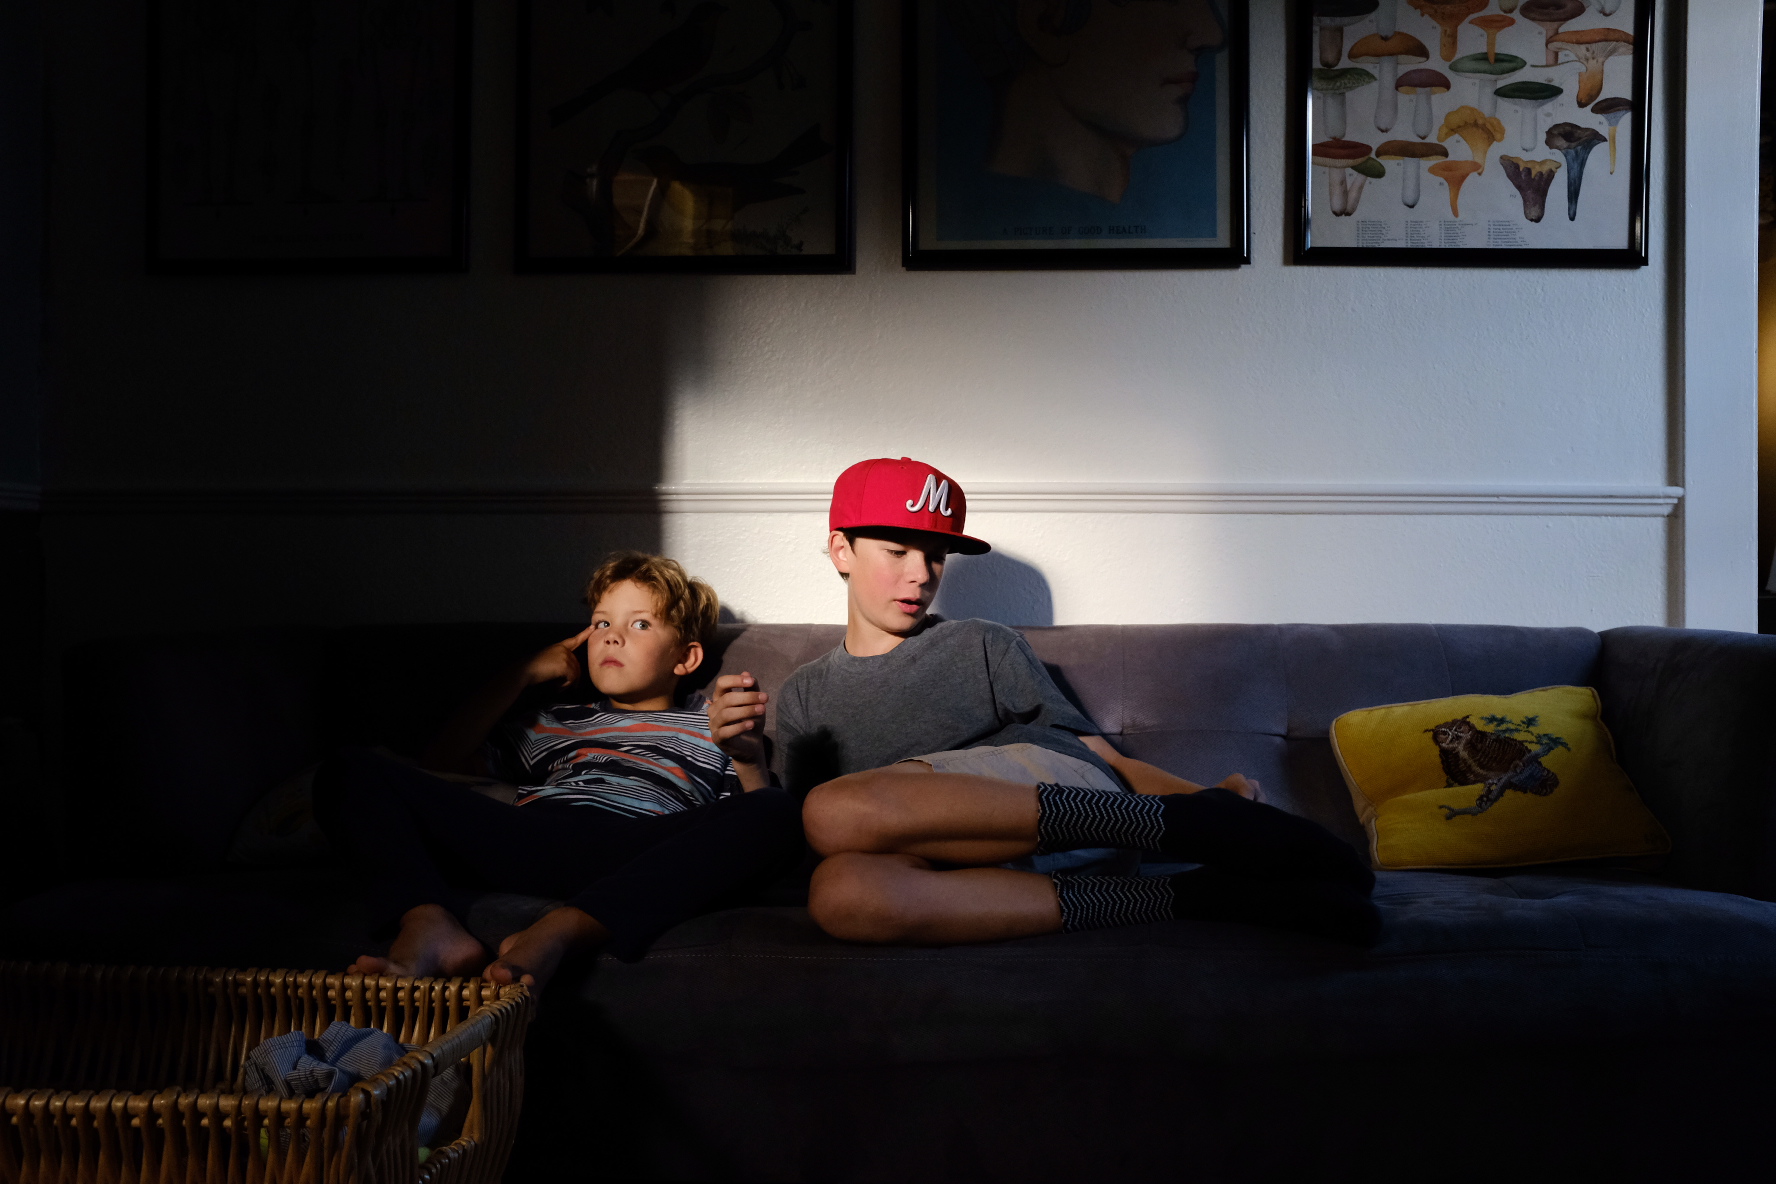 grumpy kids on couch - Documentary Family Photography